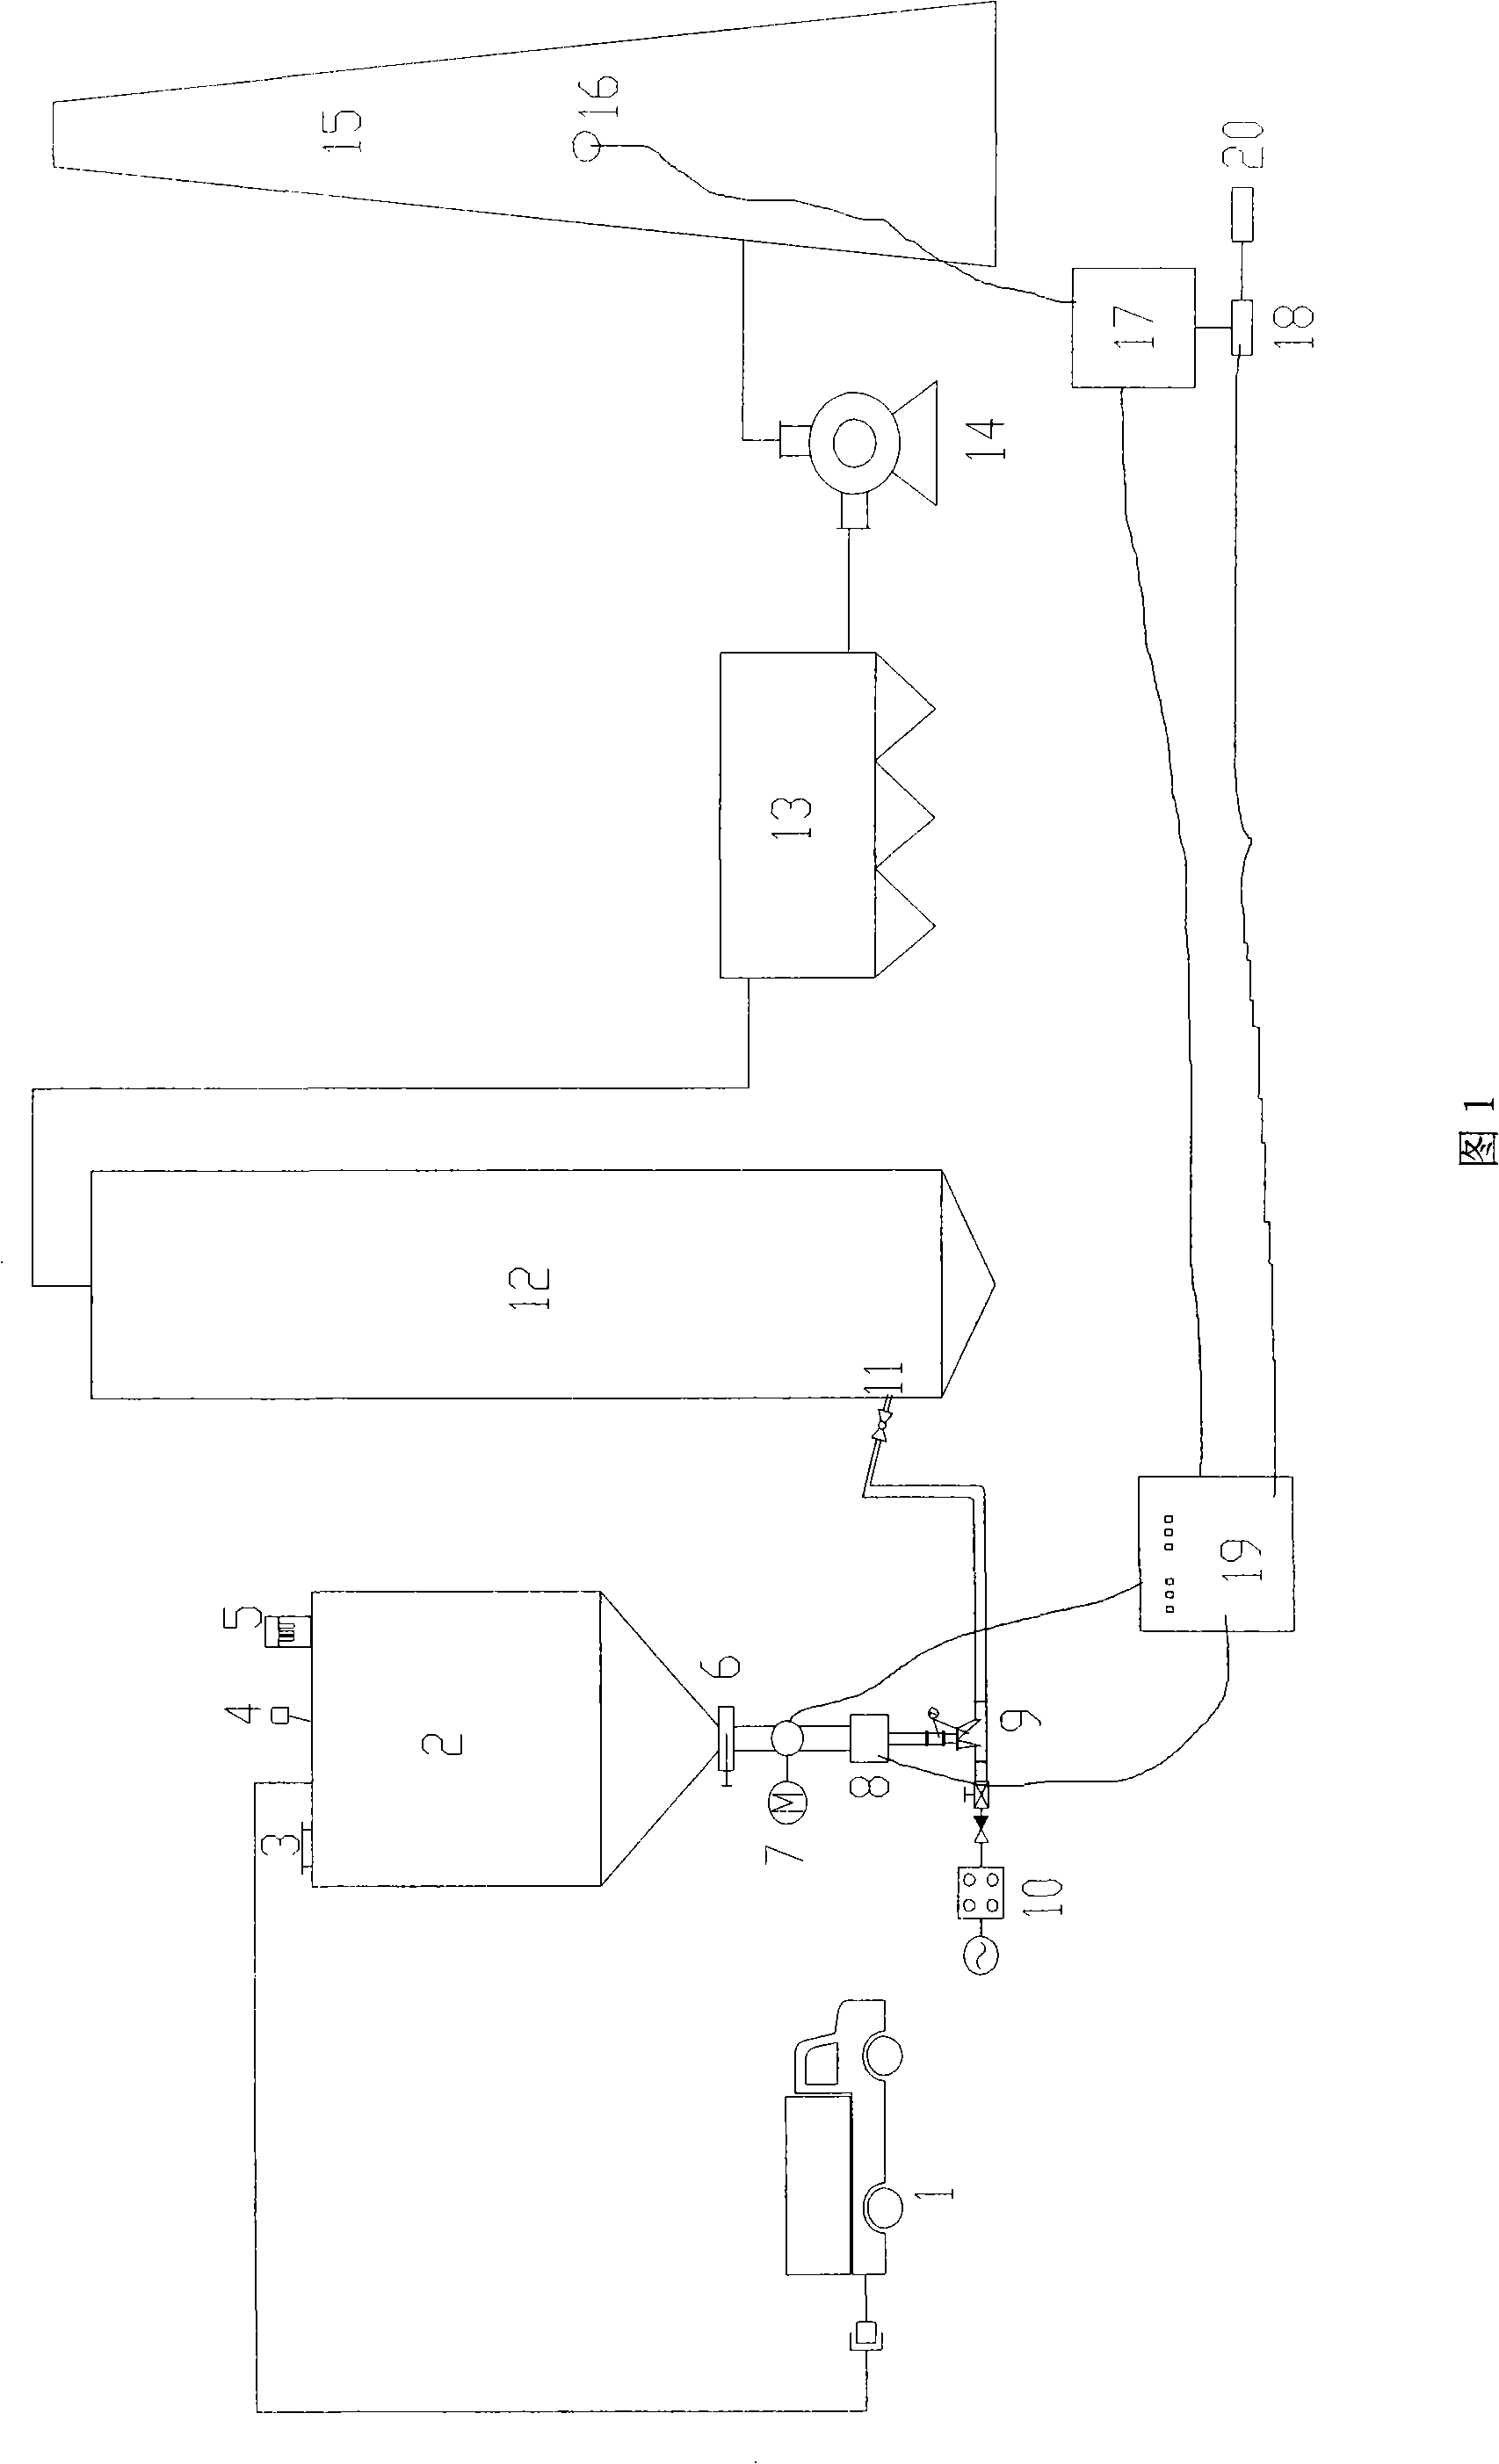 Method for spraying calcium and devulcanizing in circulating fluid-bed boiler using PLC control system